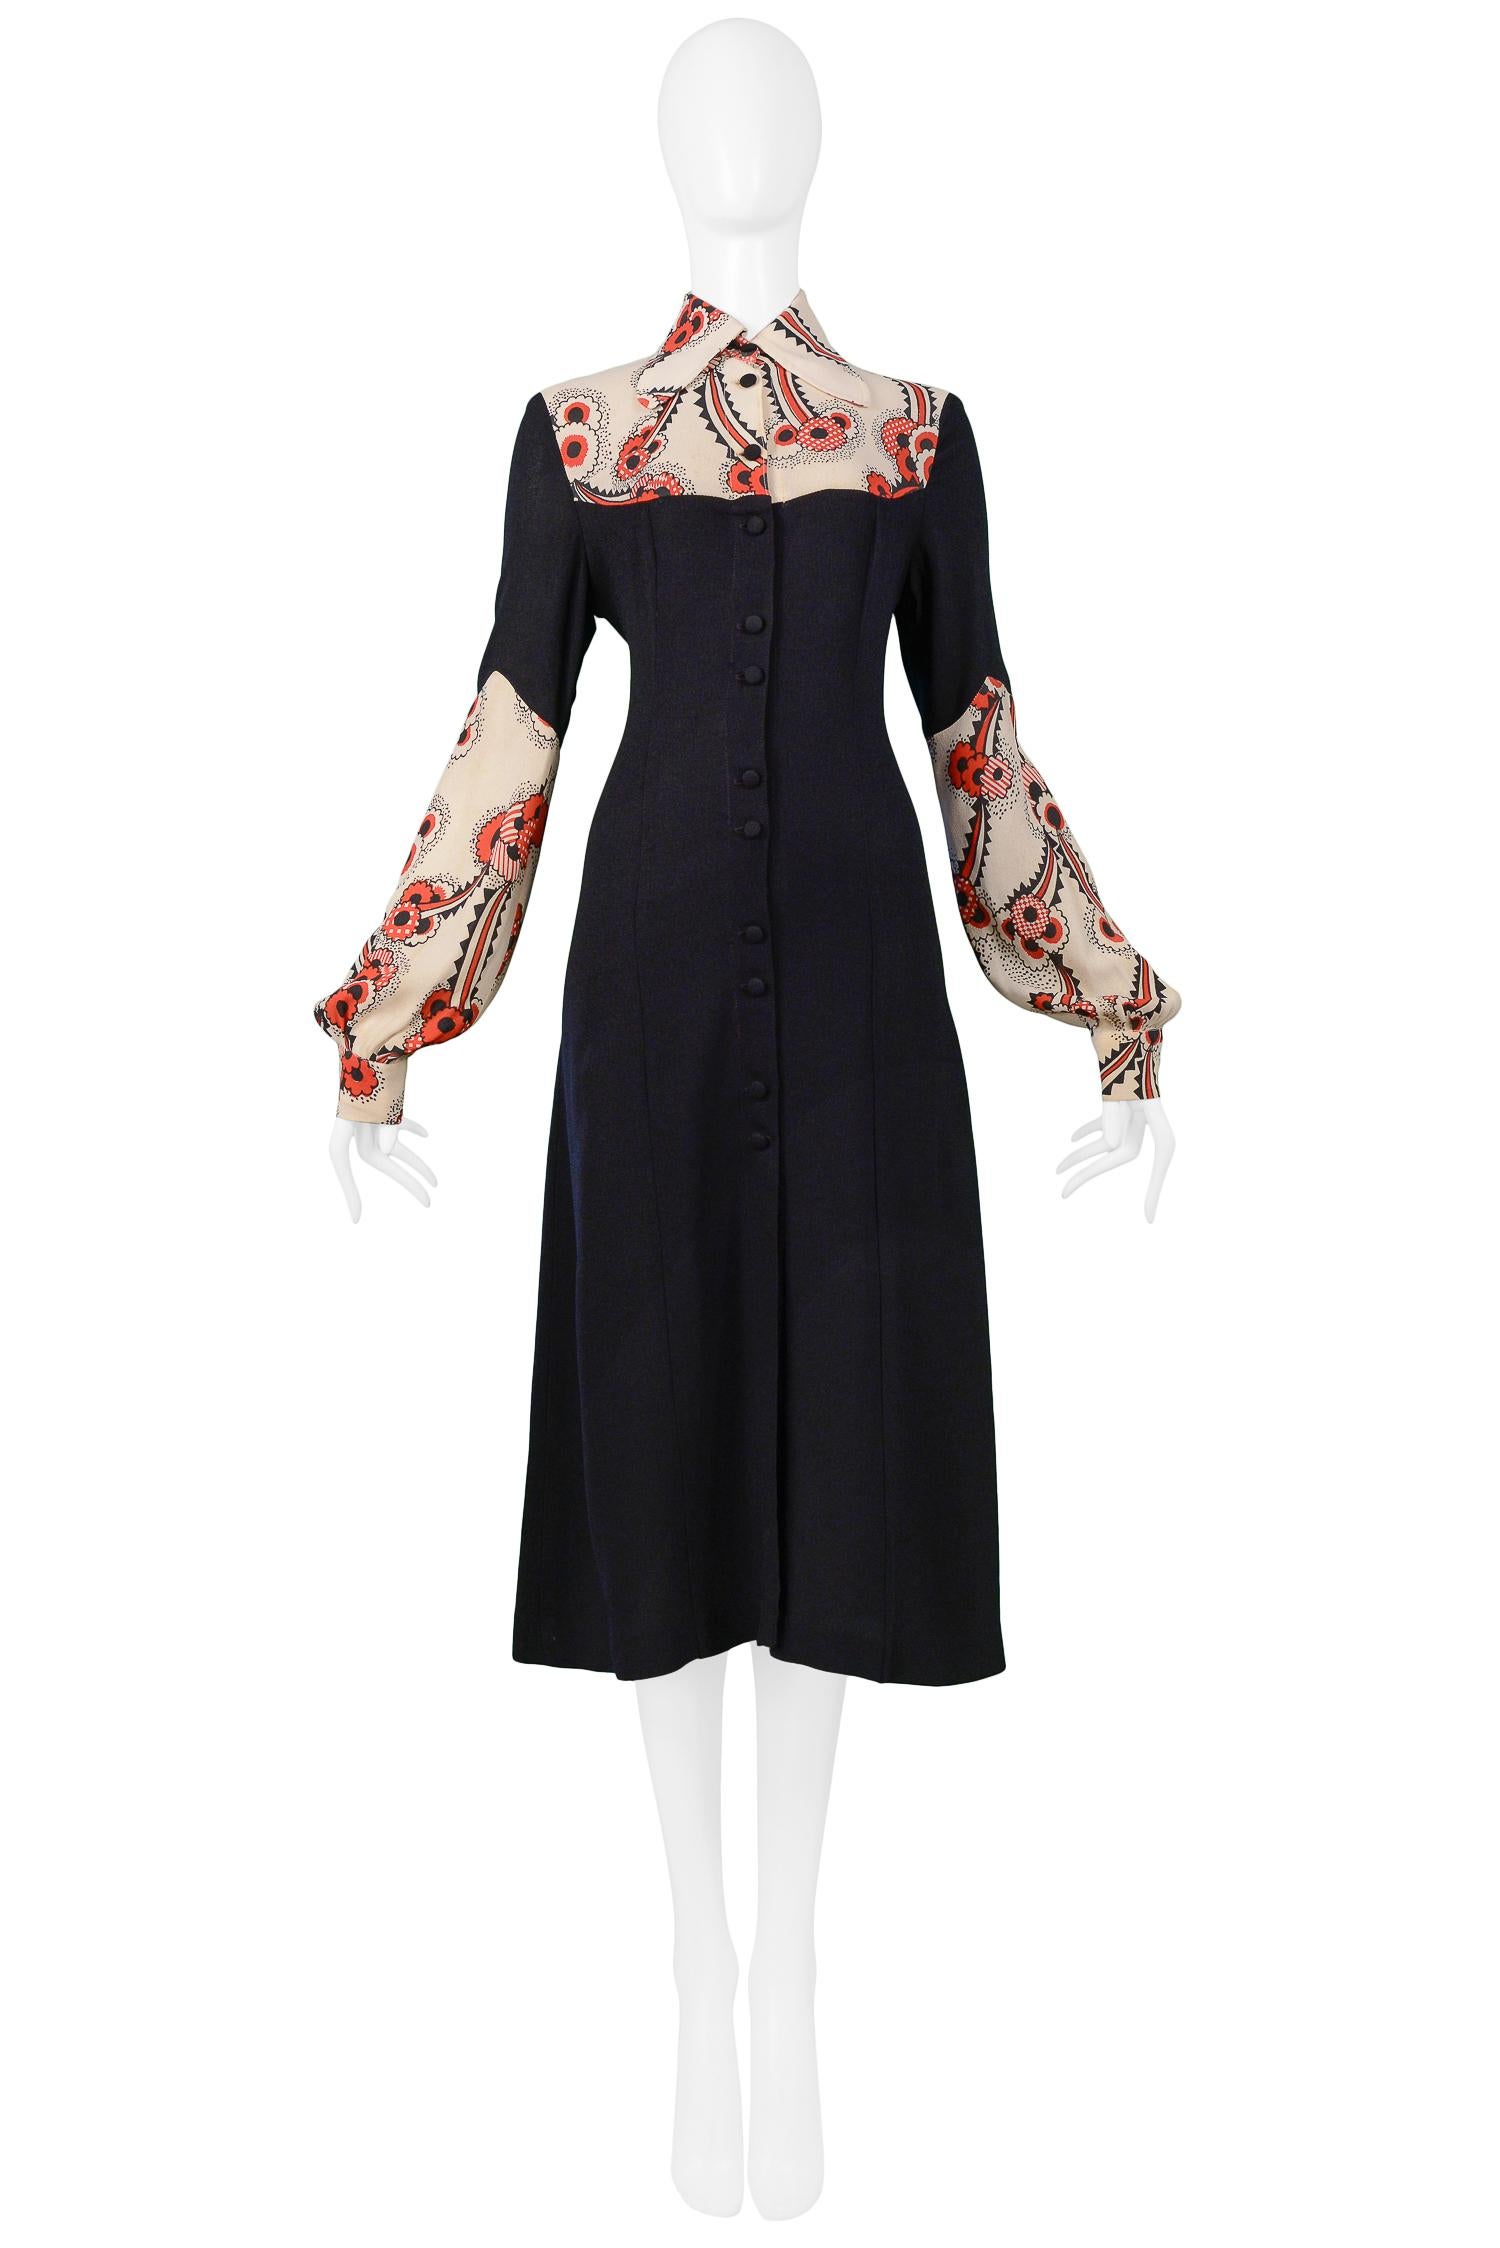 Vintage Ossie Clark black moss crepe collared dress featuring Celia Birtwell red and cream 'Floating Daisies' print, blouson sleeves and fabric covered button front closure. Circa 1968-69. 

Condition: Excellent Condition

Size: 2/4